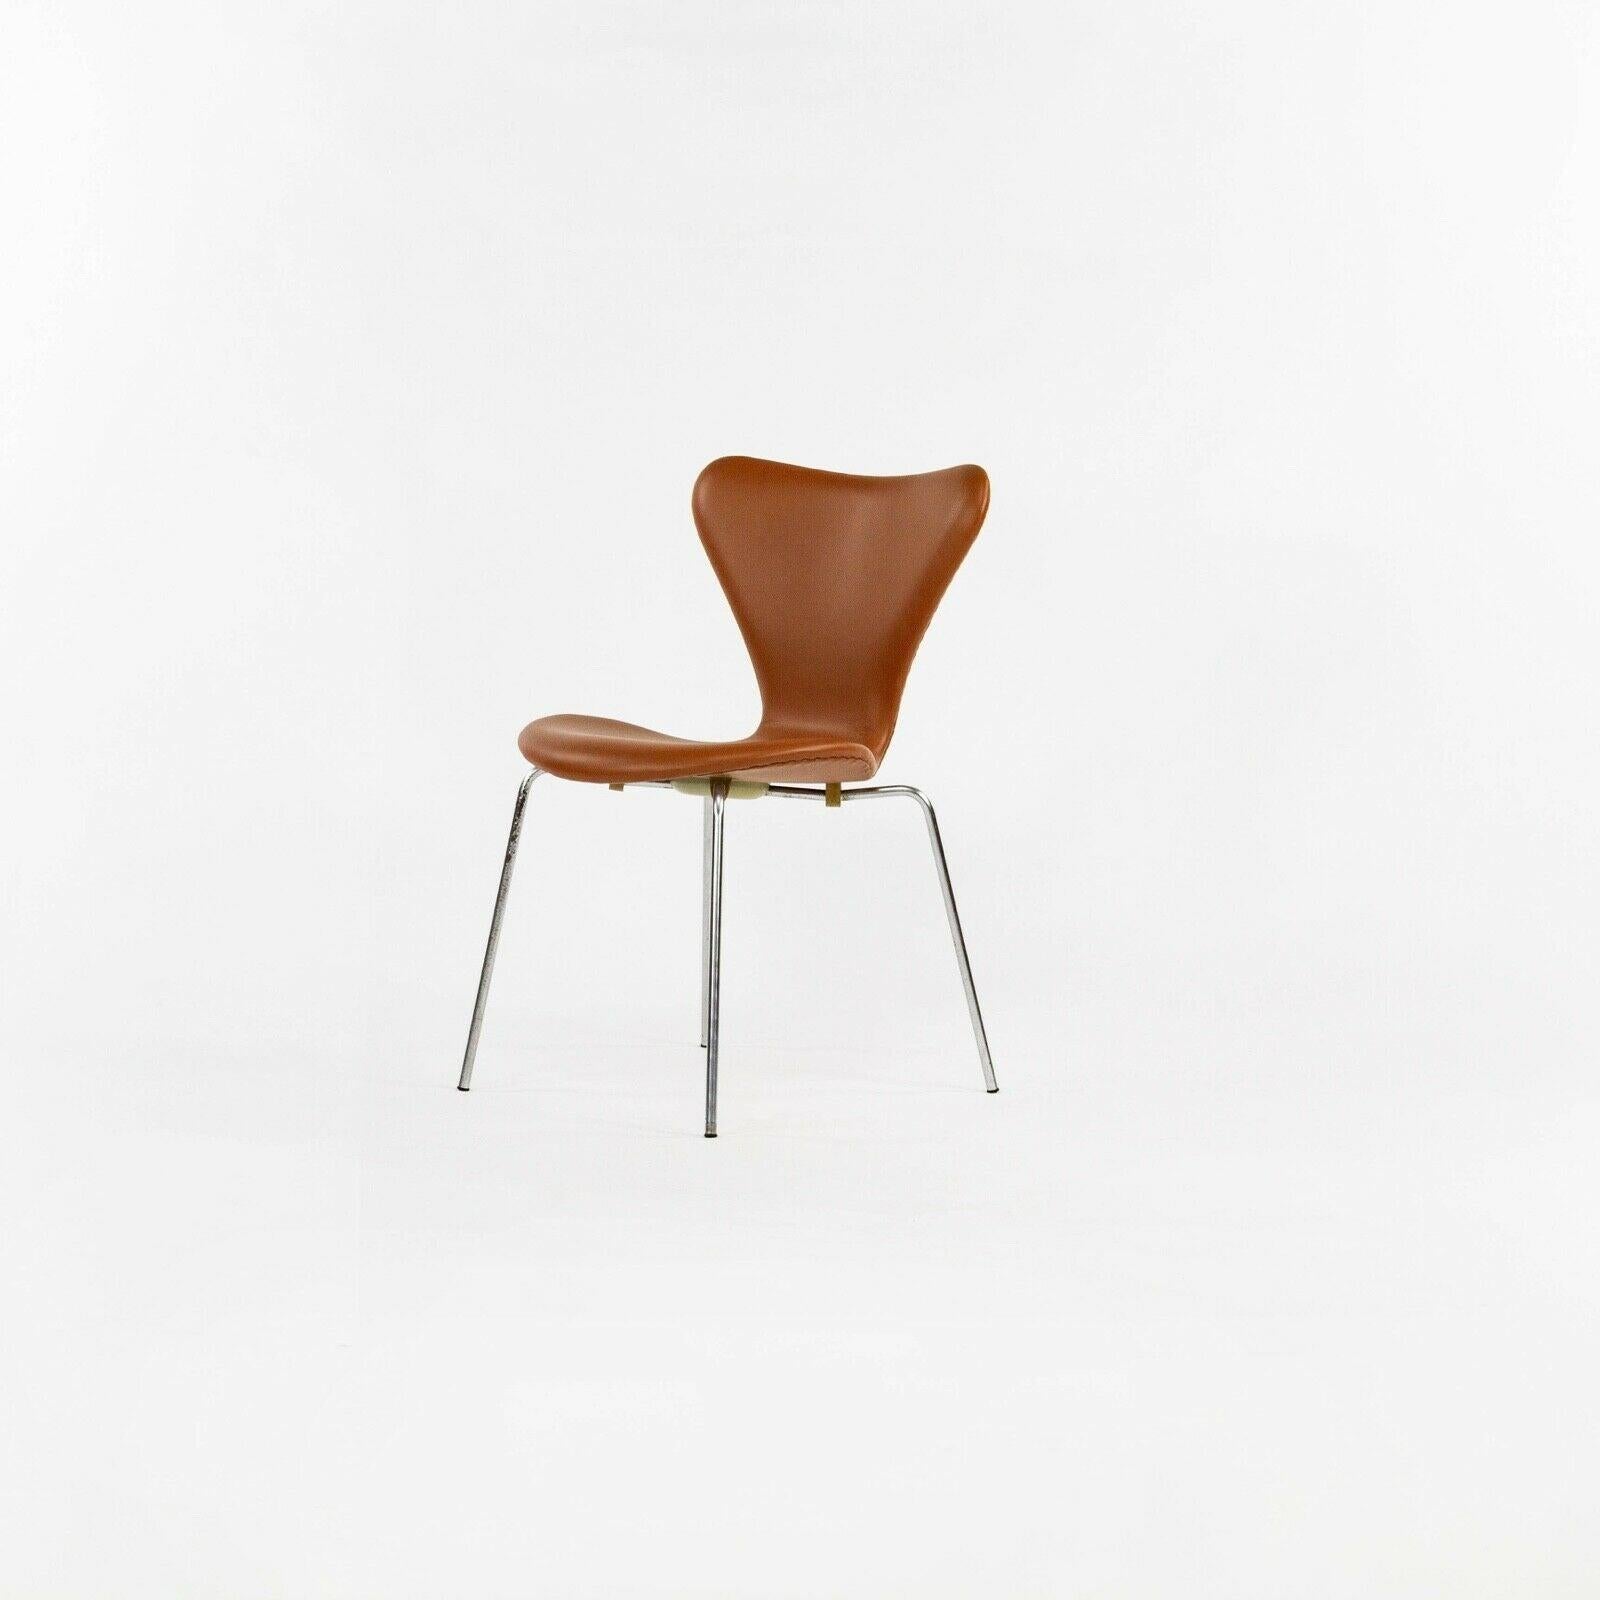 Set of 4x 1969 Arne Jacobsen Fritz Hansen Series 7 Handstiched Leather Chairs For Sale 3